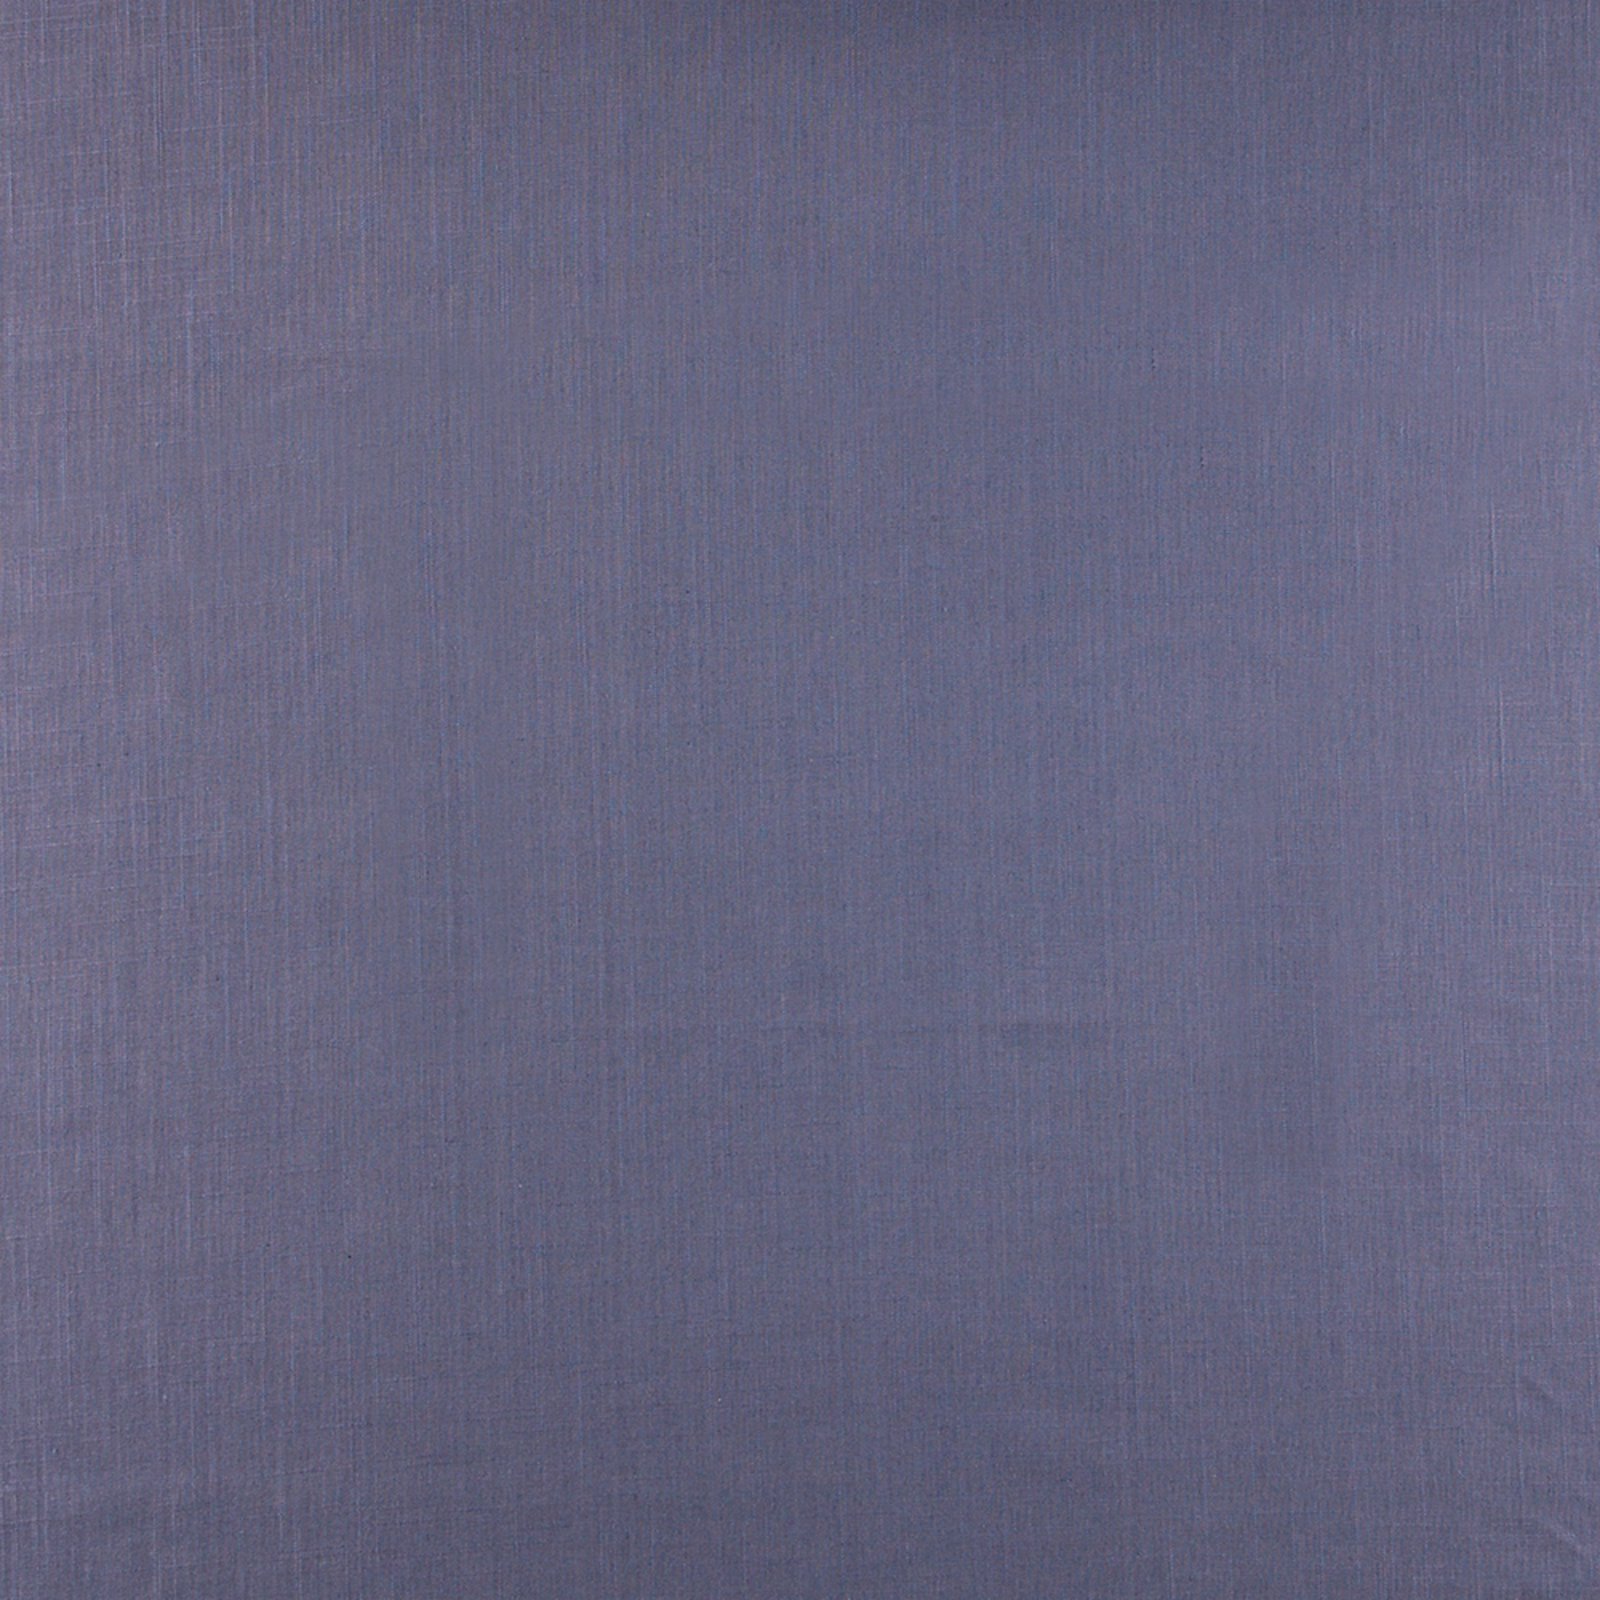 Coarse linen/viscose dusty blue 850529_pack_solid